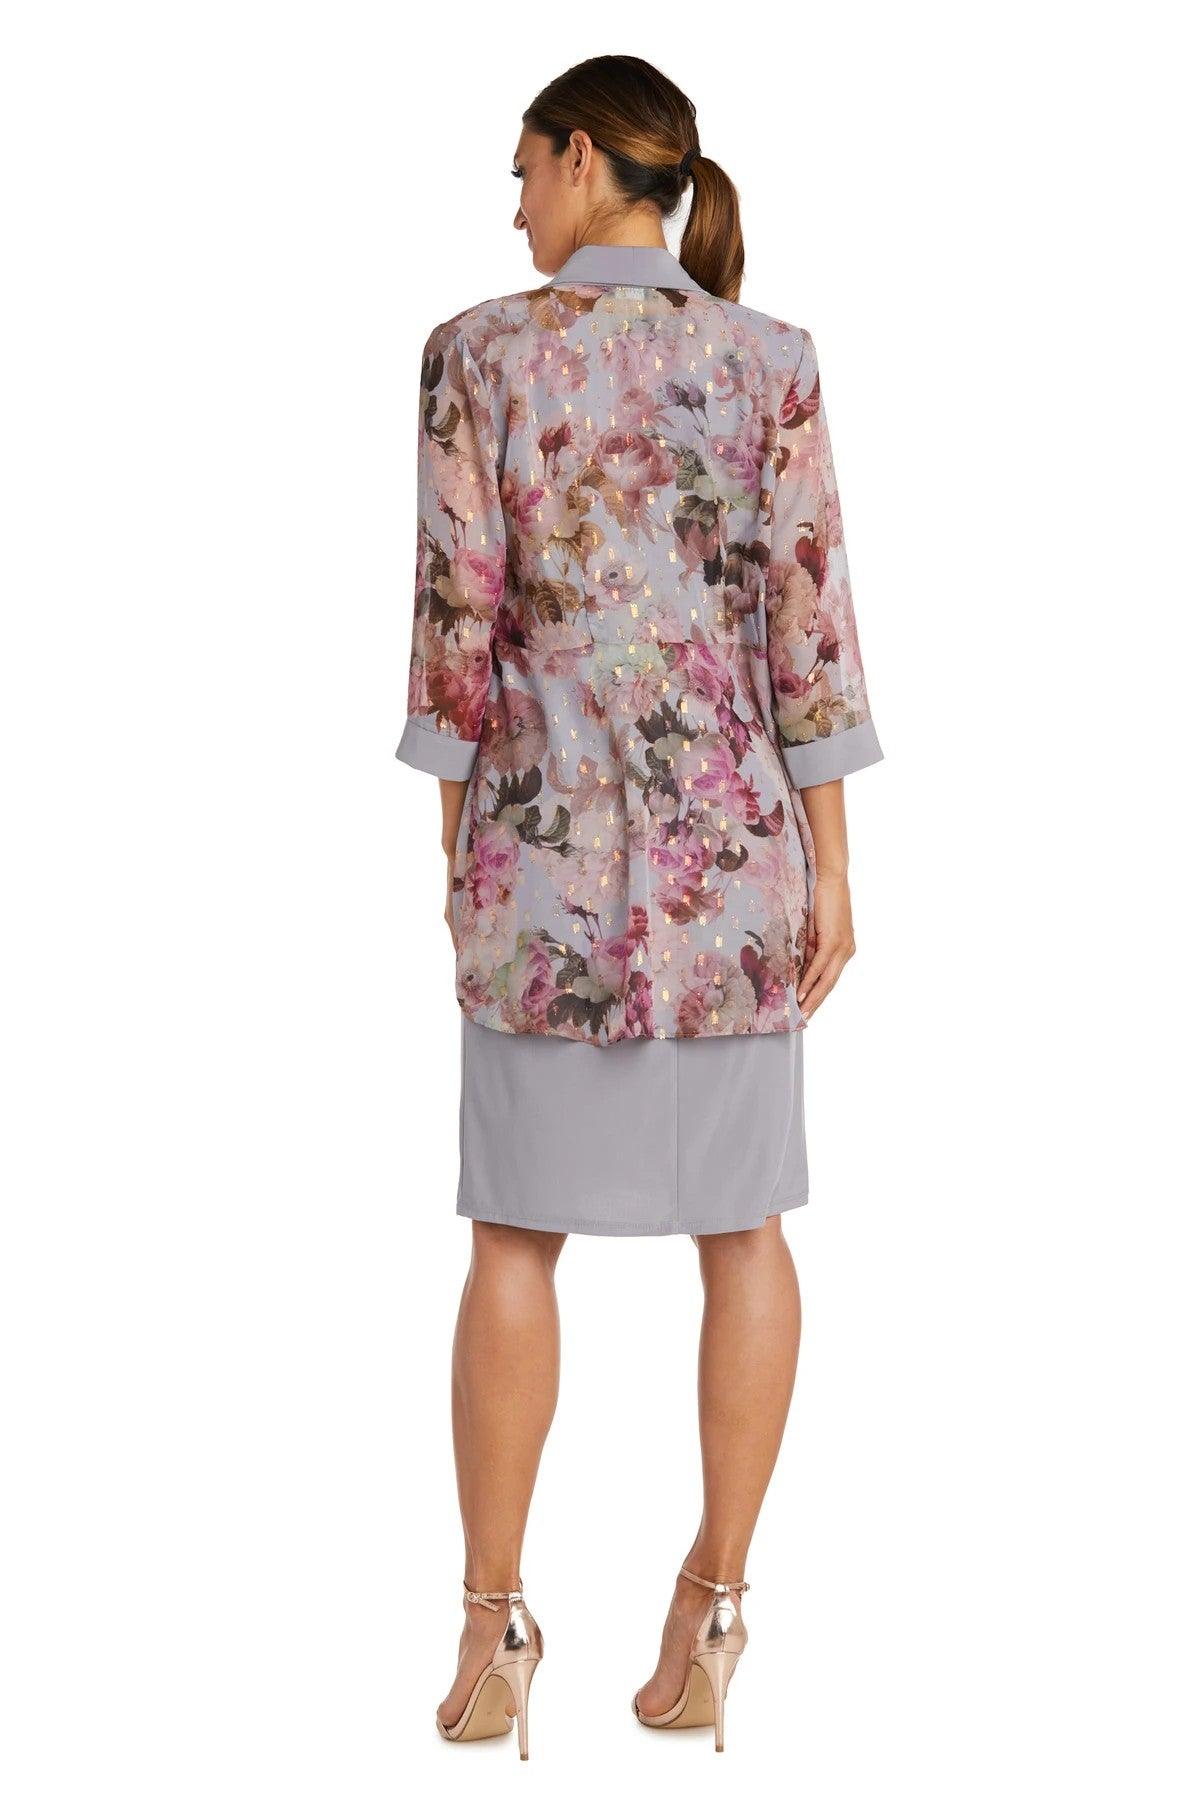 Mother of the Bride Two-Piece Printed Jacket Dress Sale - The Dress Outlet